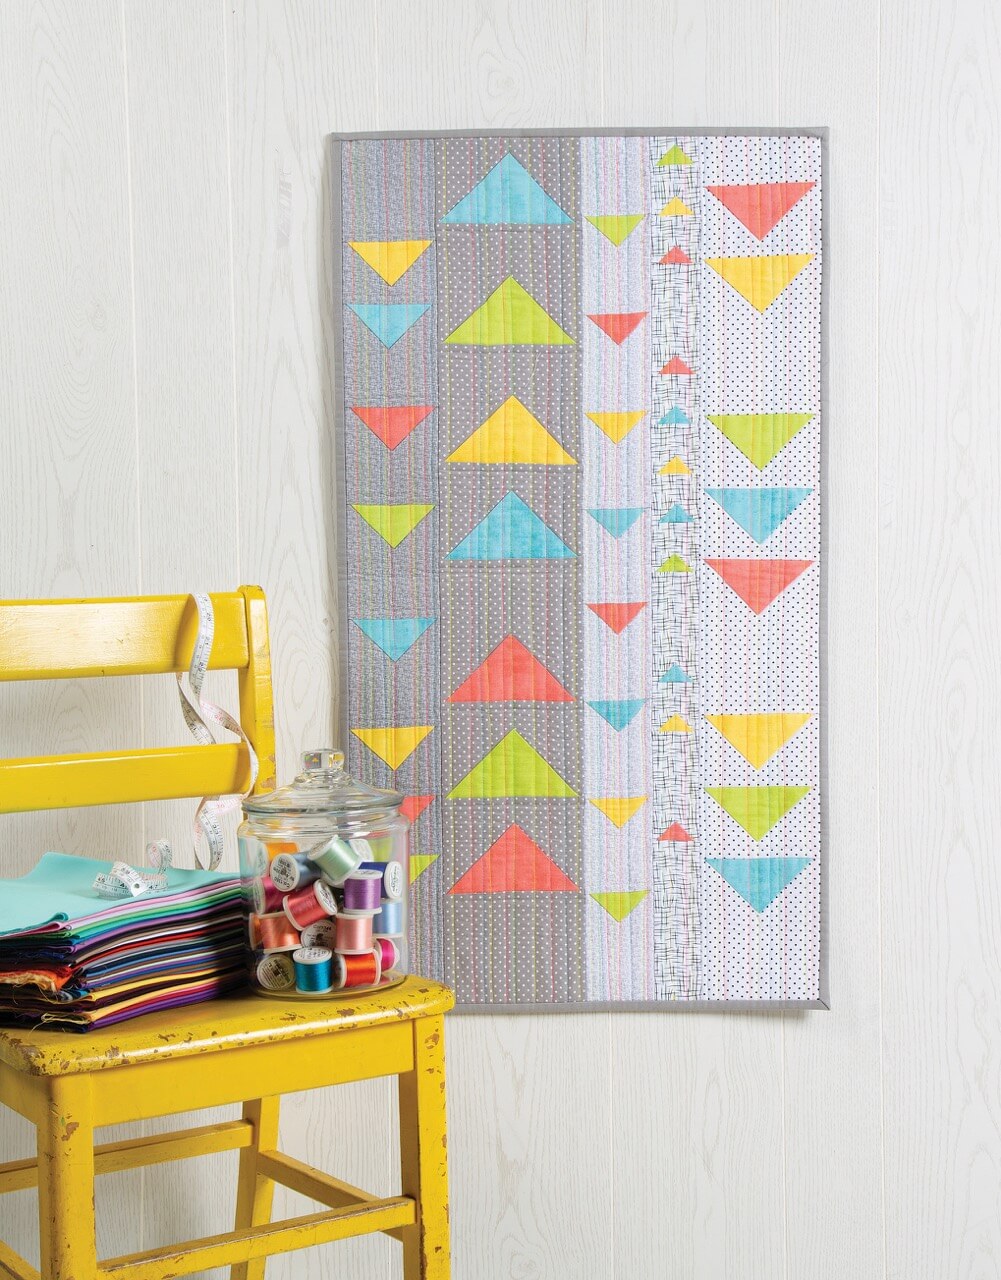 NEW! Modern Floating Triangles Wall Hanging and Table Runner Pattern by Nancy Zieman Productions.